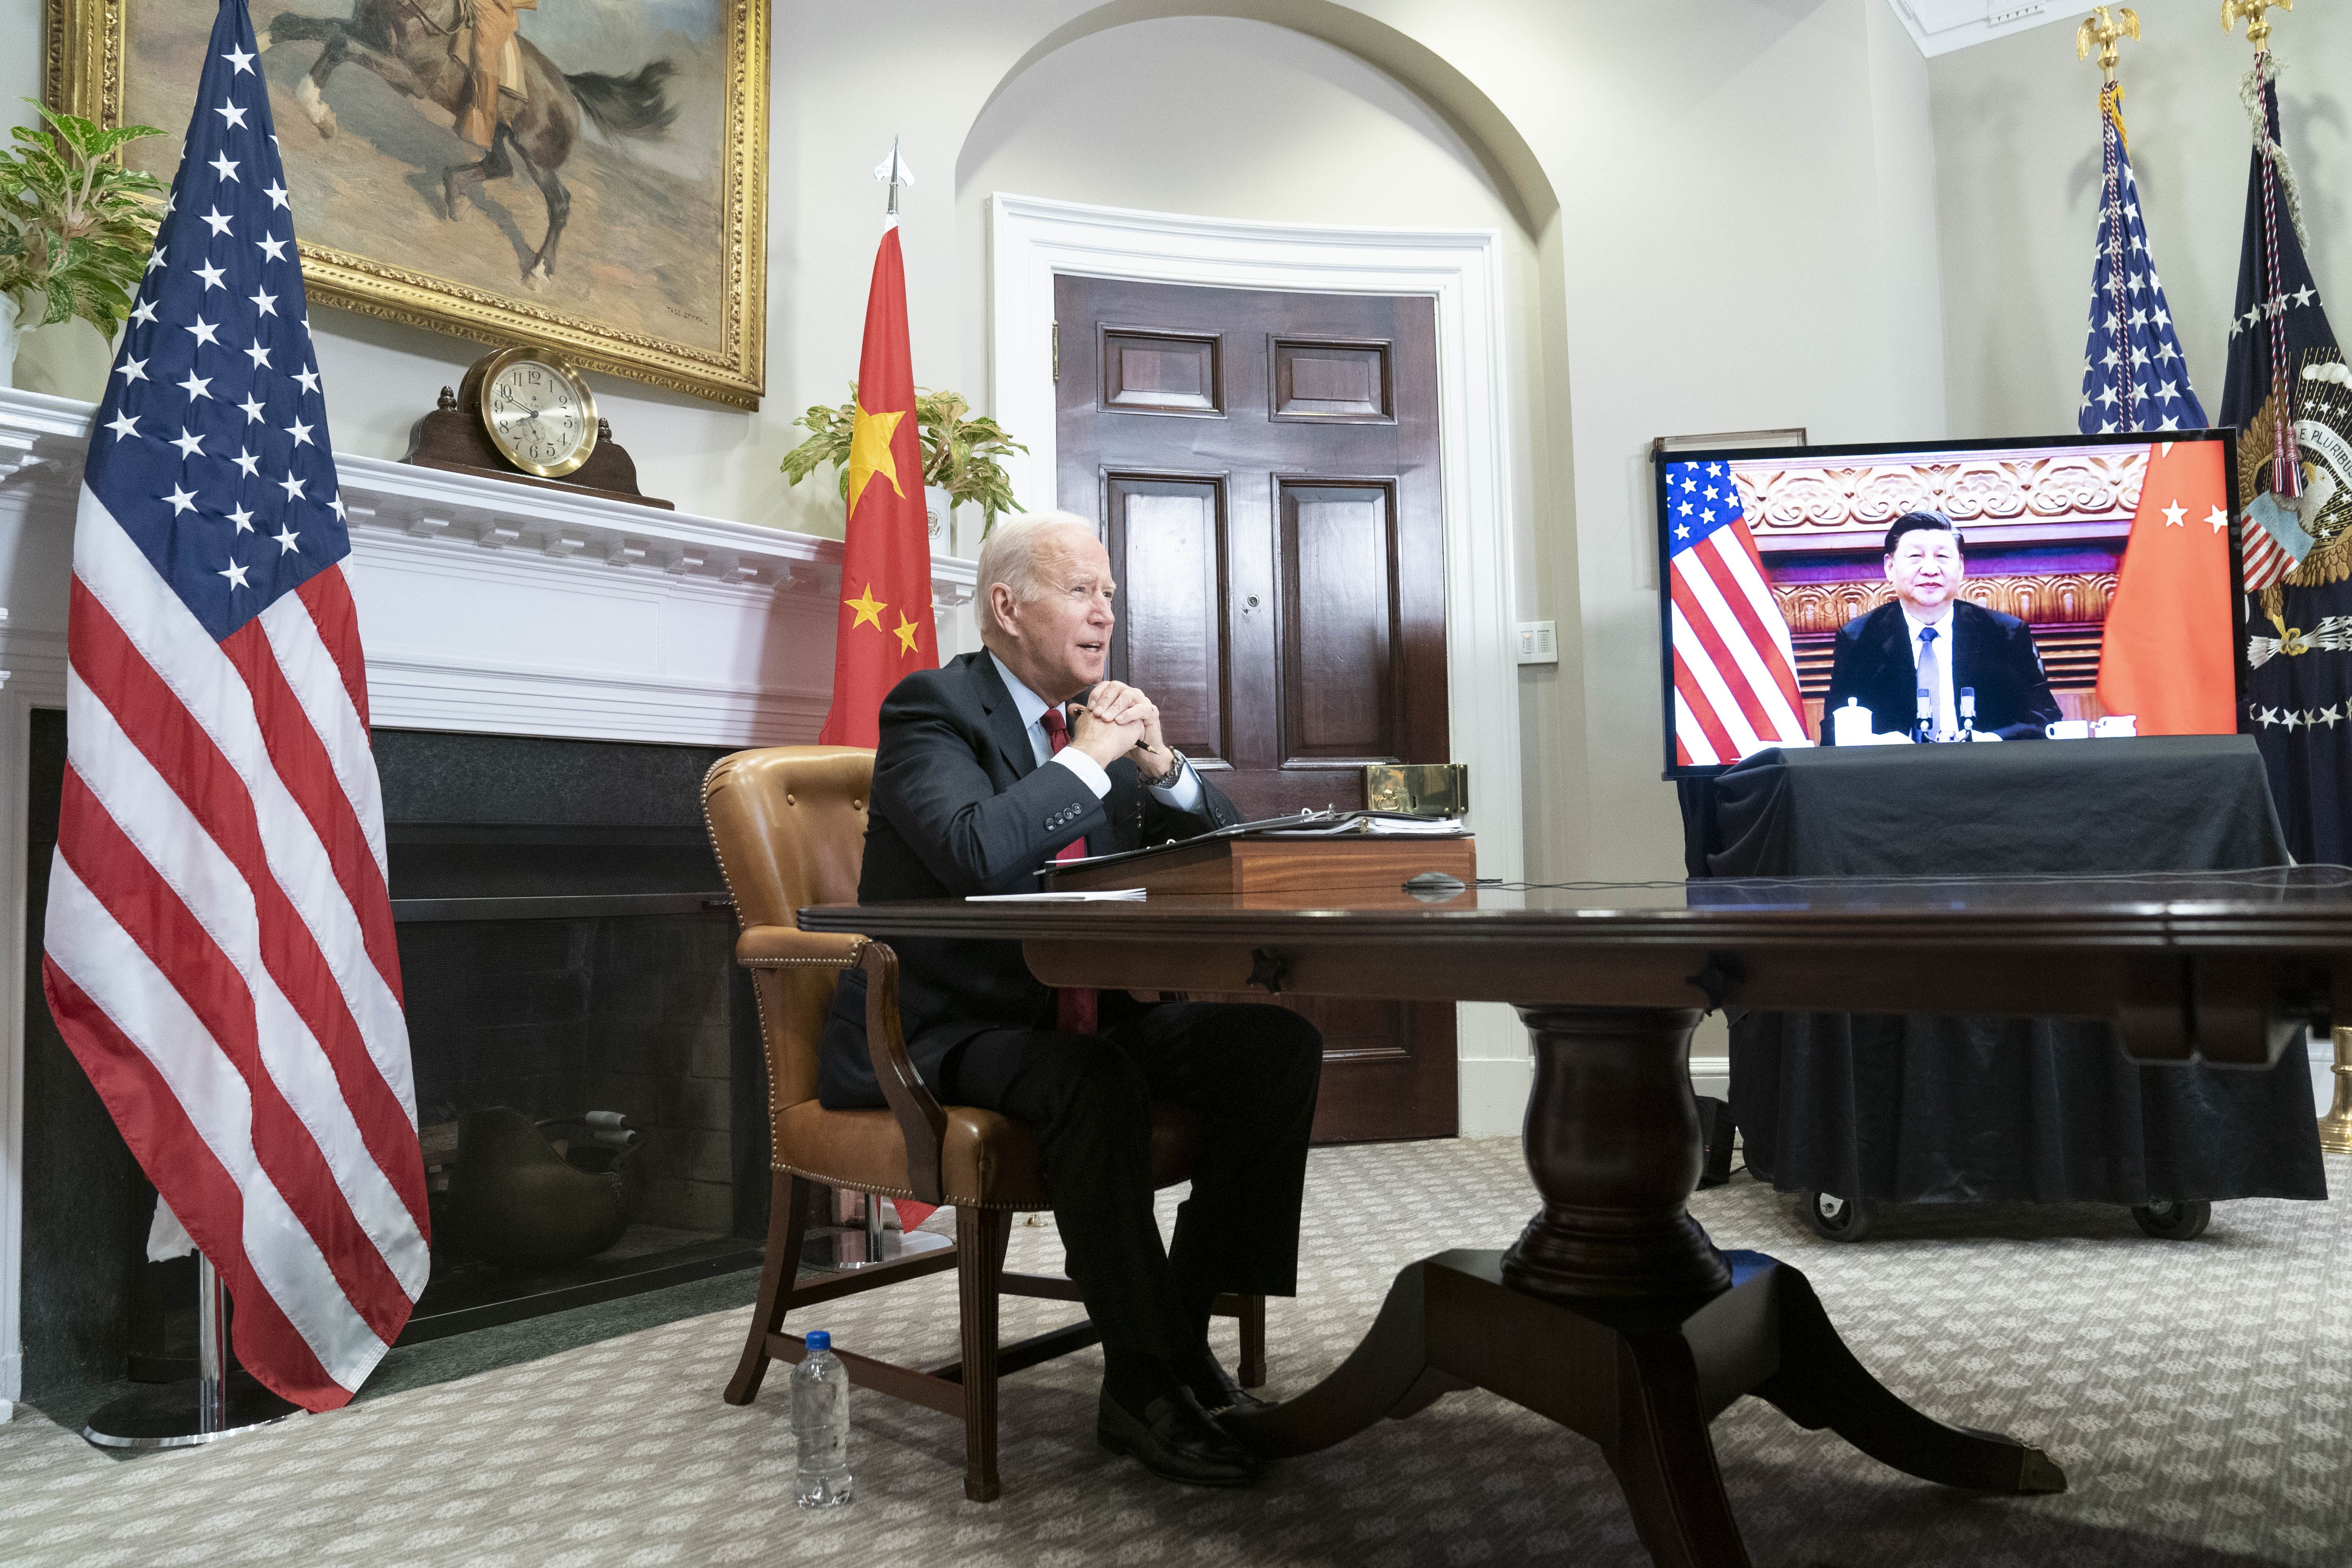 Archive image of the telematic meeting between Joe Biden and Xi Jinping in November 2021.